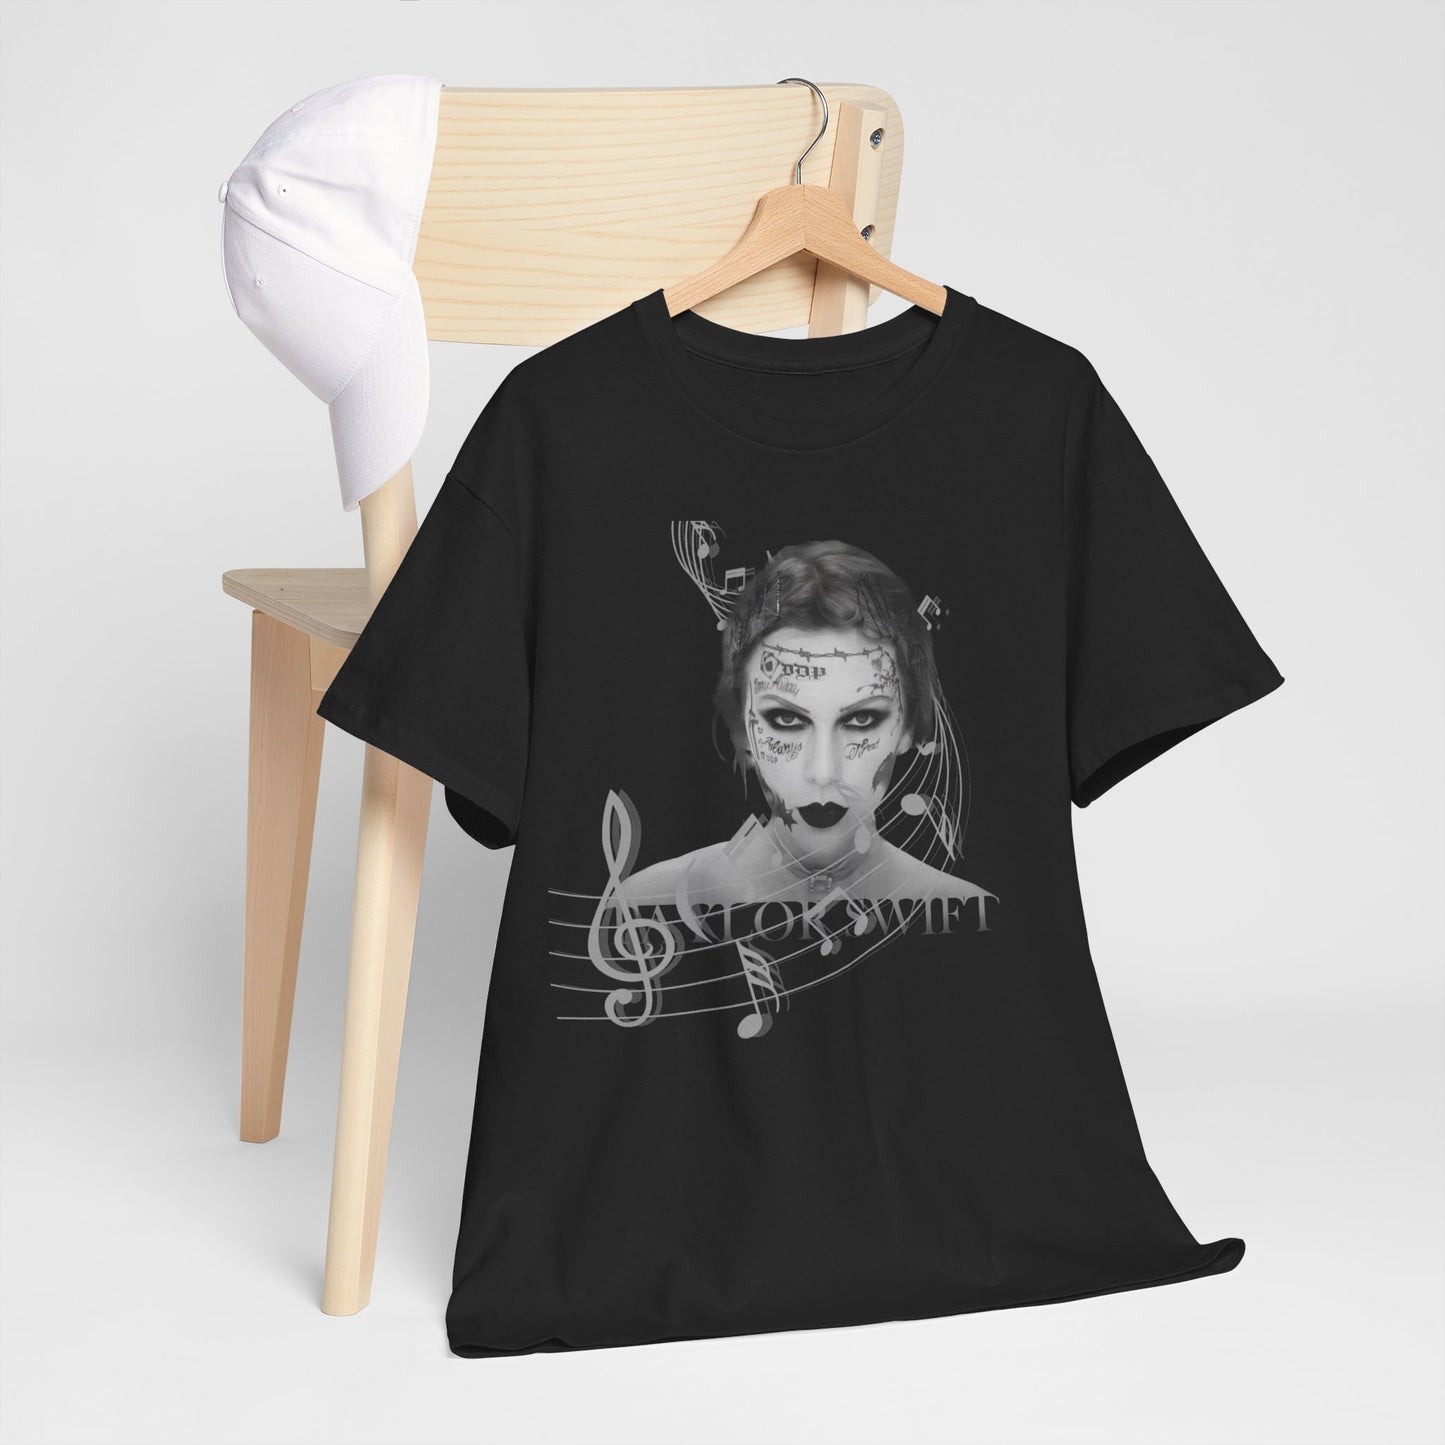 Taylor Swift The Tortured Poets Department High Quality Printed Unisex Heavy Cotton T-shirt